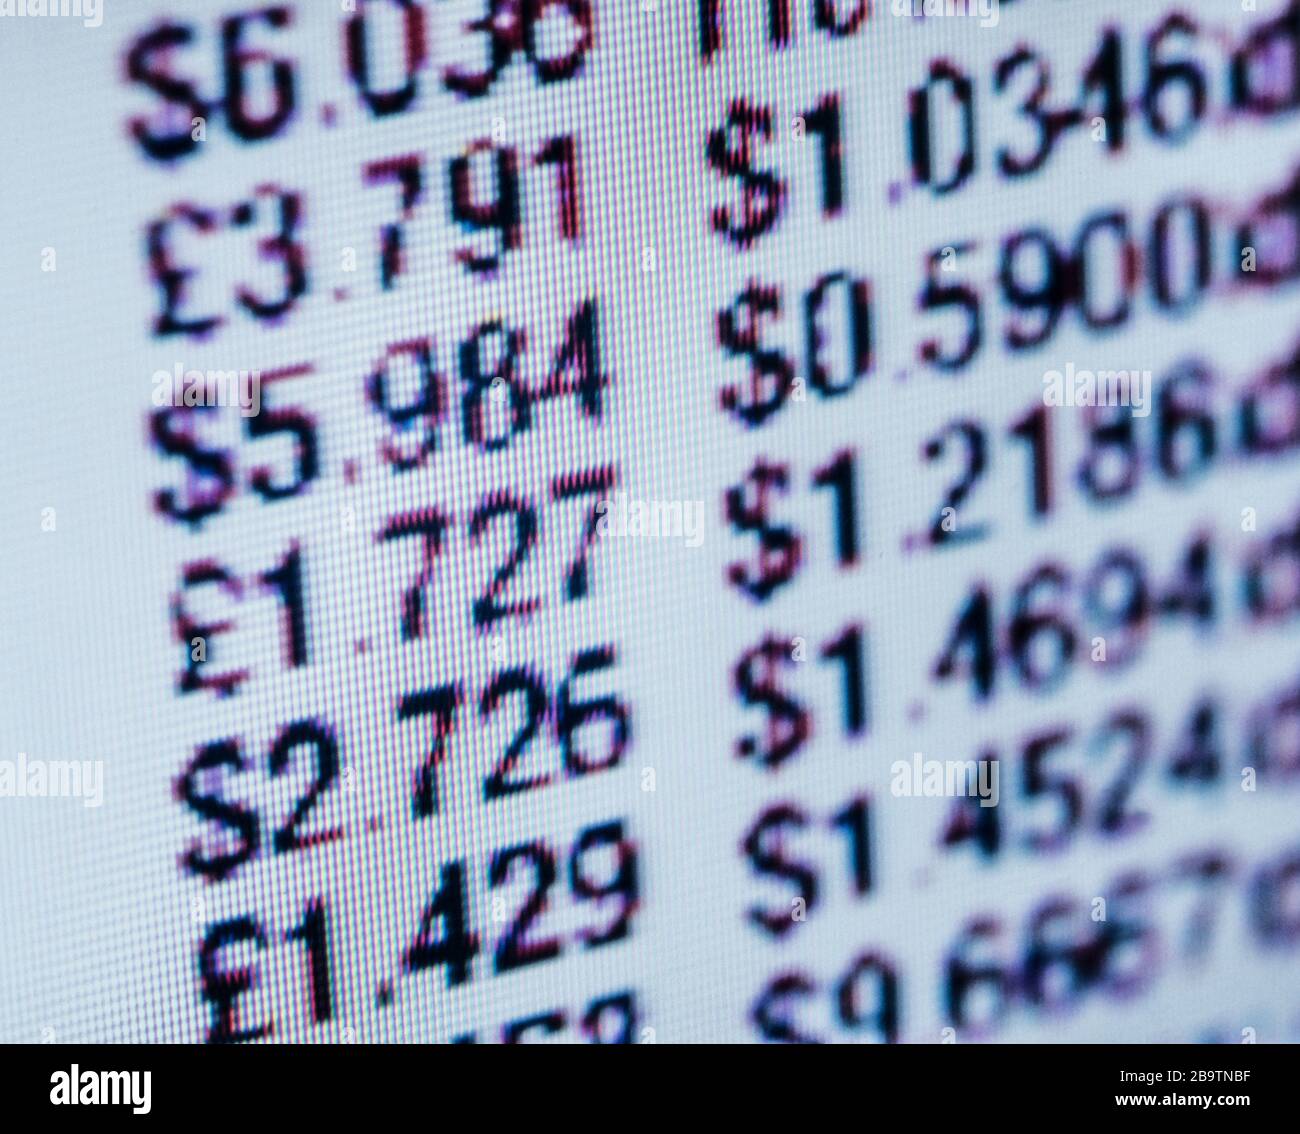 currency figures on digital screen Stock Photo